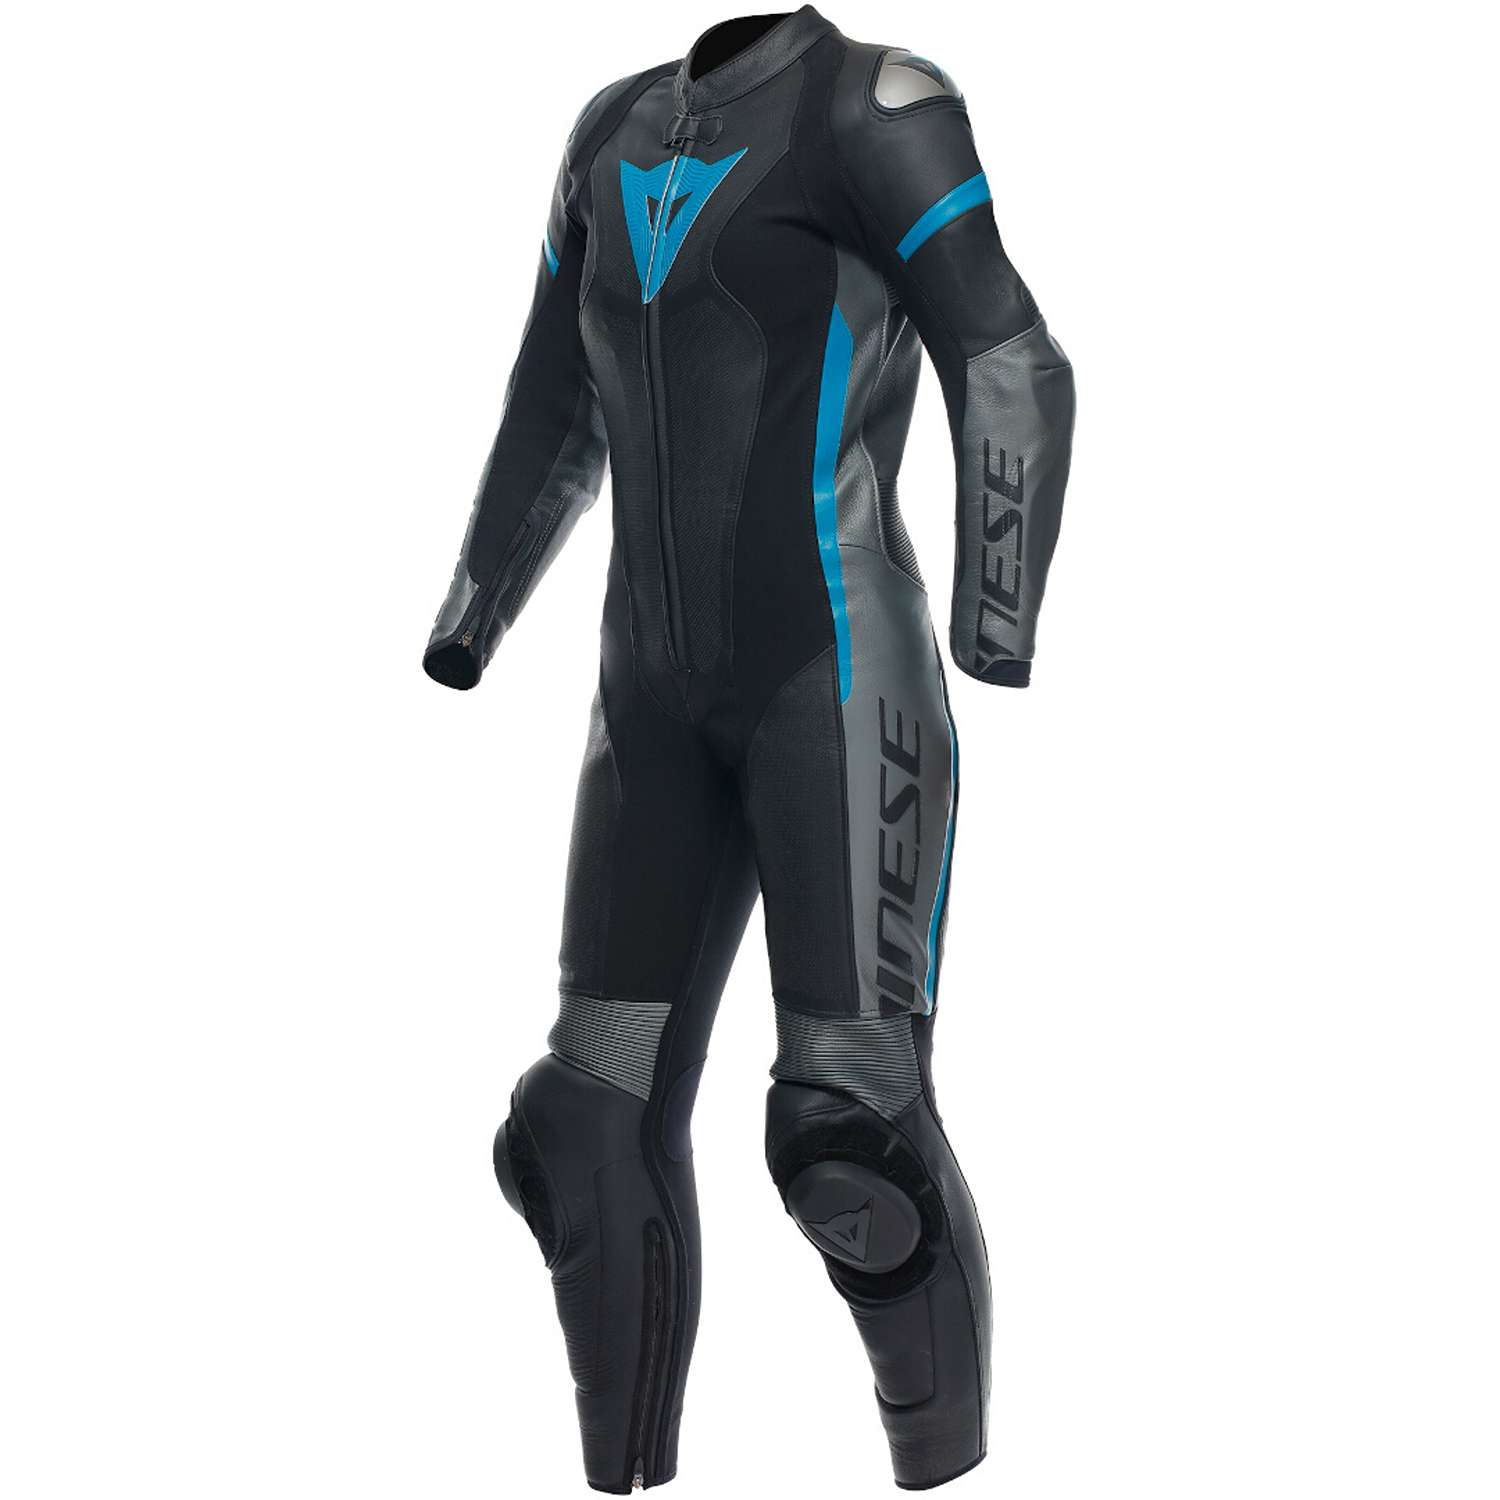 Image of EU Dainese Grobnik Lady Leather 1Pc Suit Perf Black Anthracite Teal Taille 54